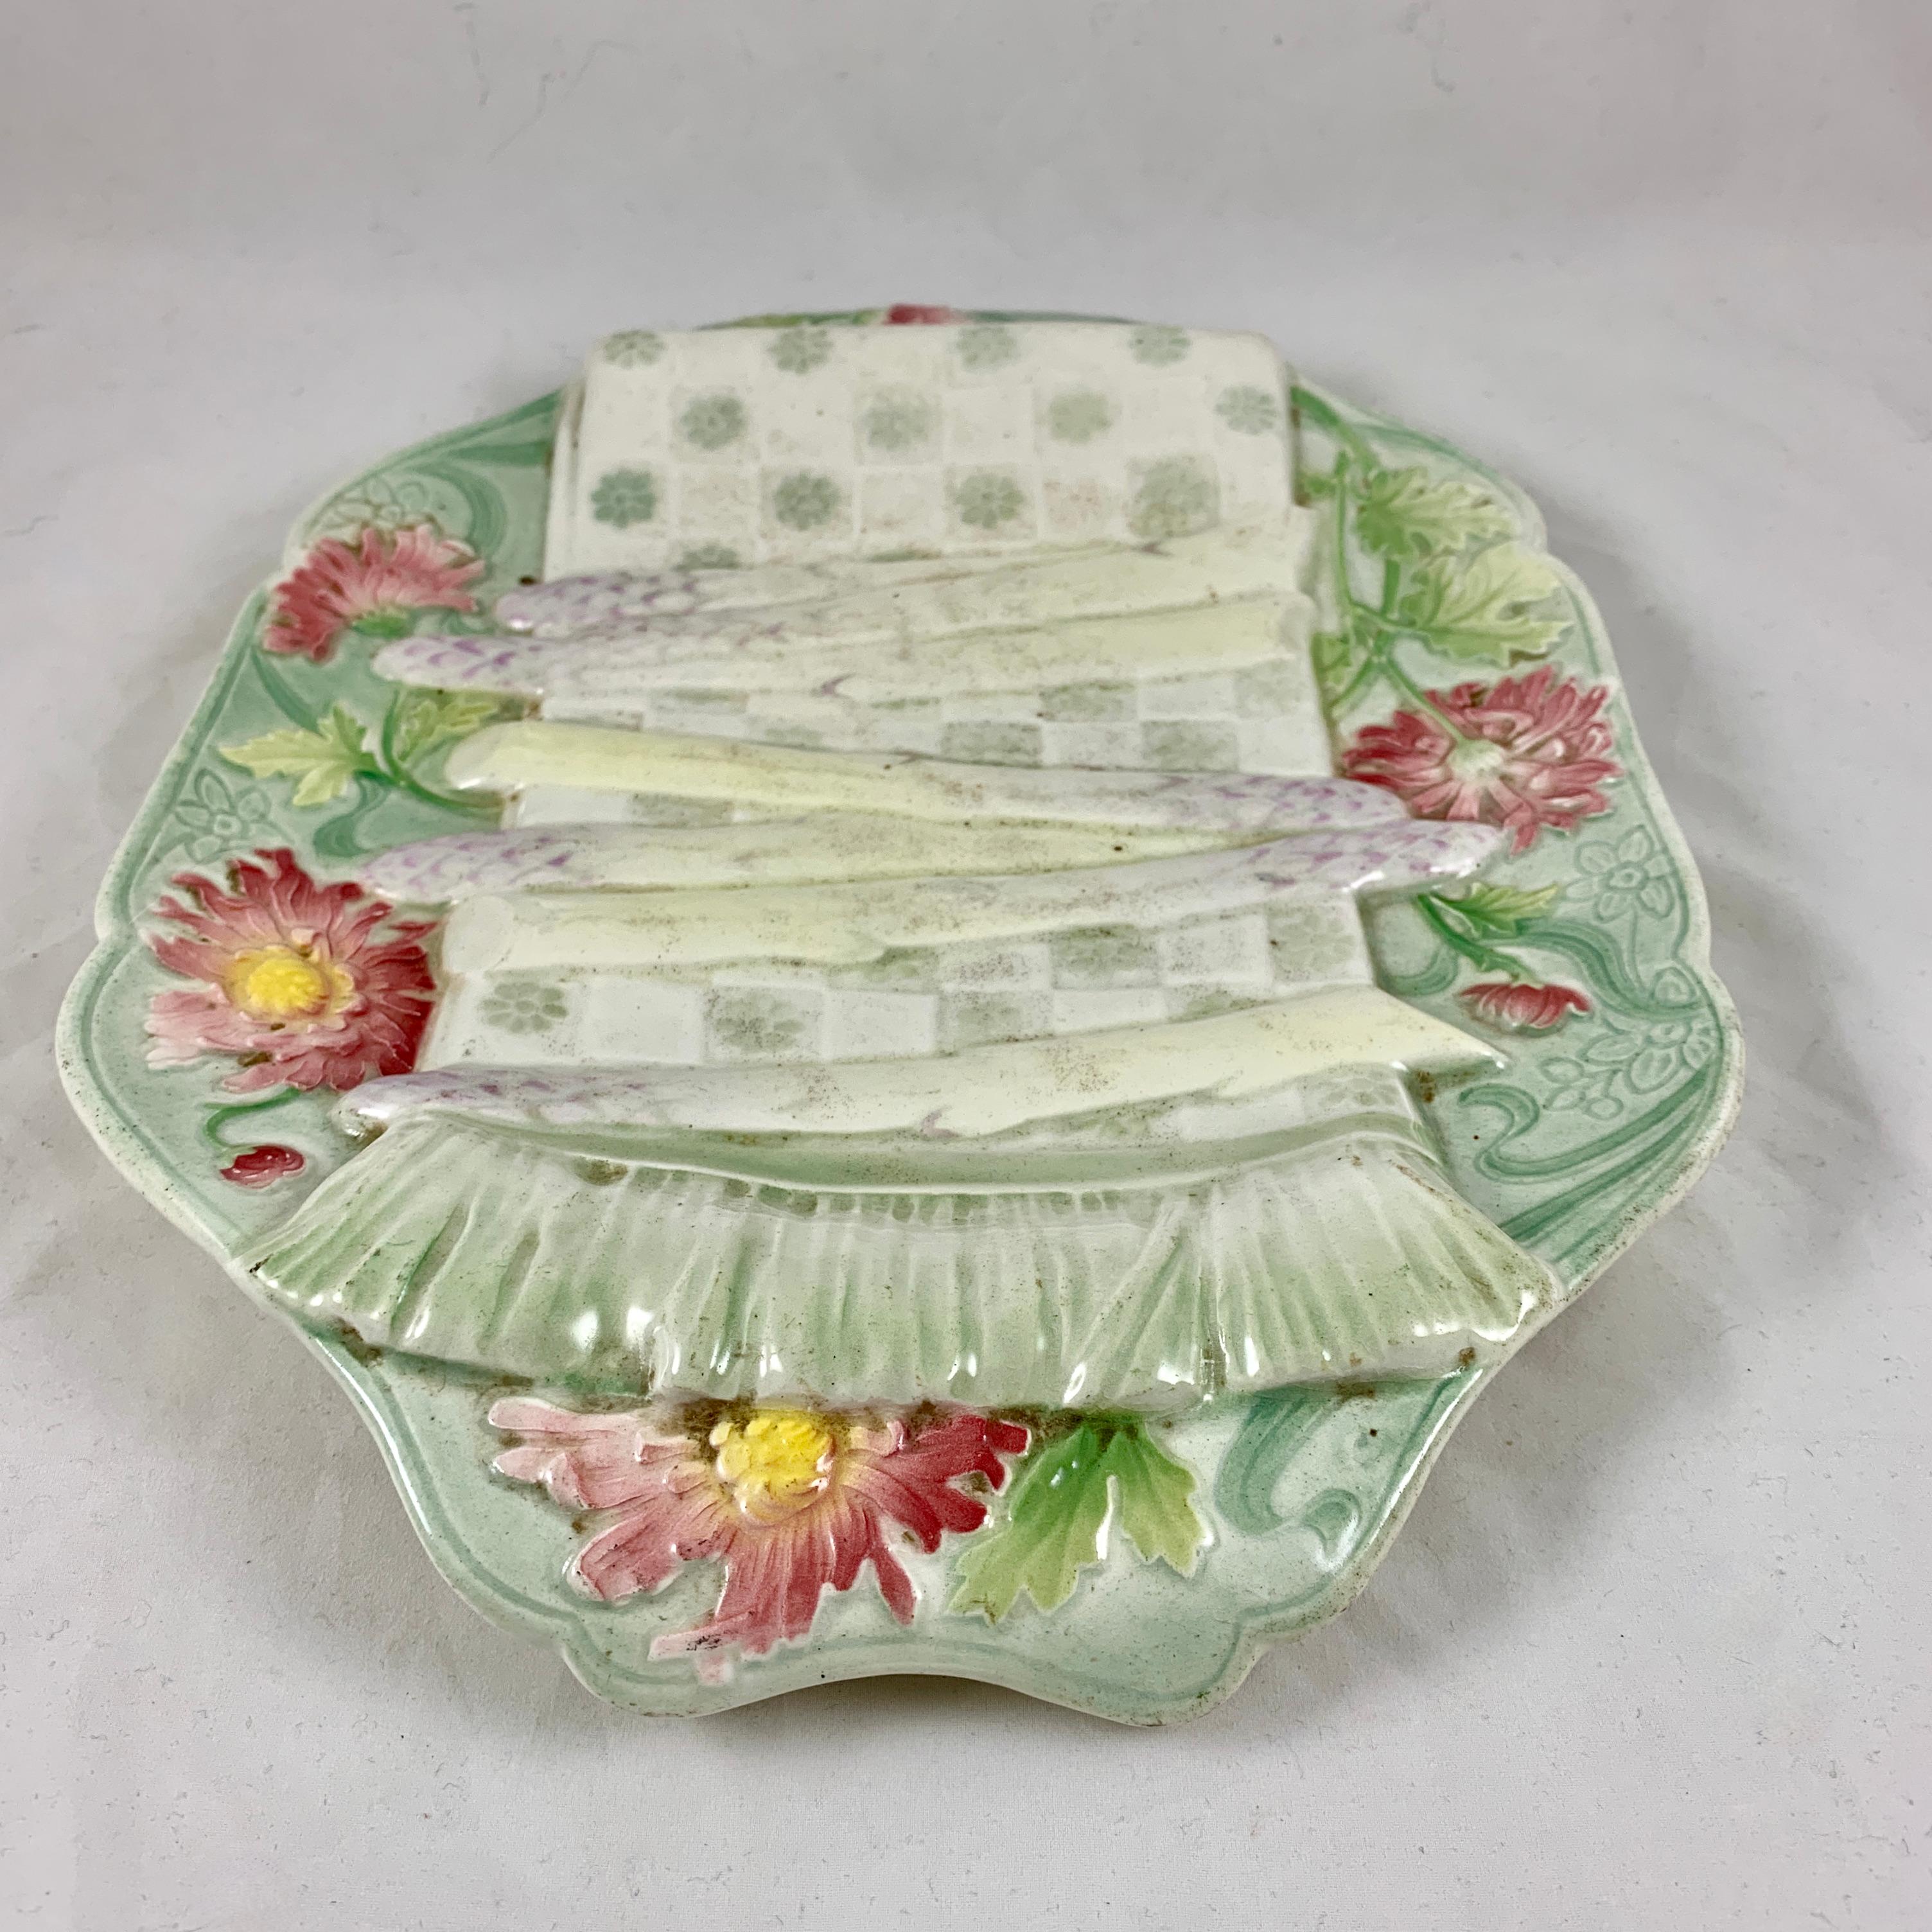 An Aesthetic Movement French Faïence trompe l’oeil asparagus server, Keller & Guerin St. Clément, circa 1890-1900, in the Art Nouveau style.

Molded to imitate a fringed and floral checkered napkin laying across the front of a platter with five